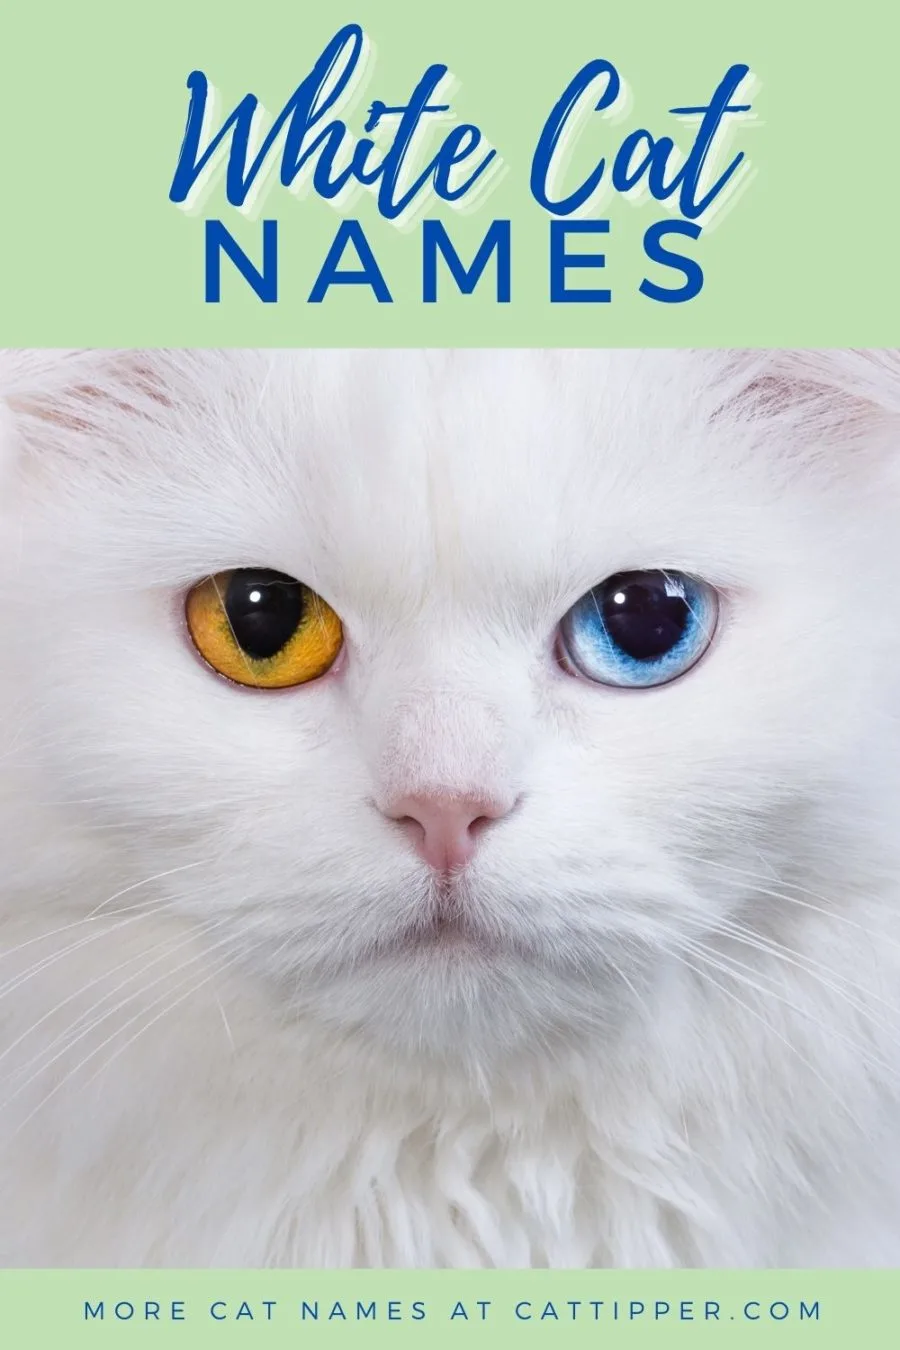 image of white cat with one gold eye and one blue eye